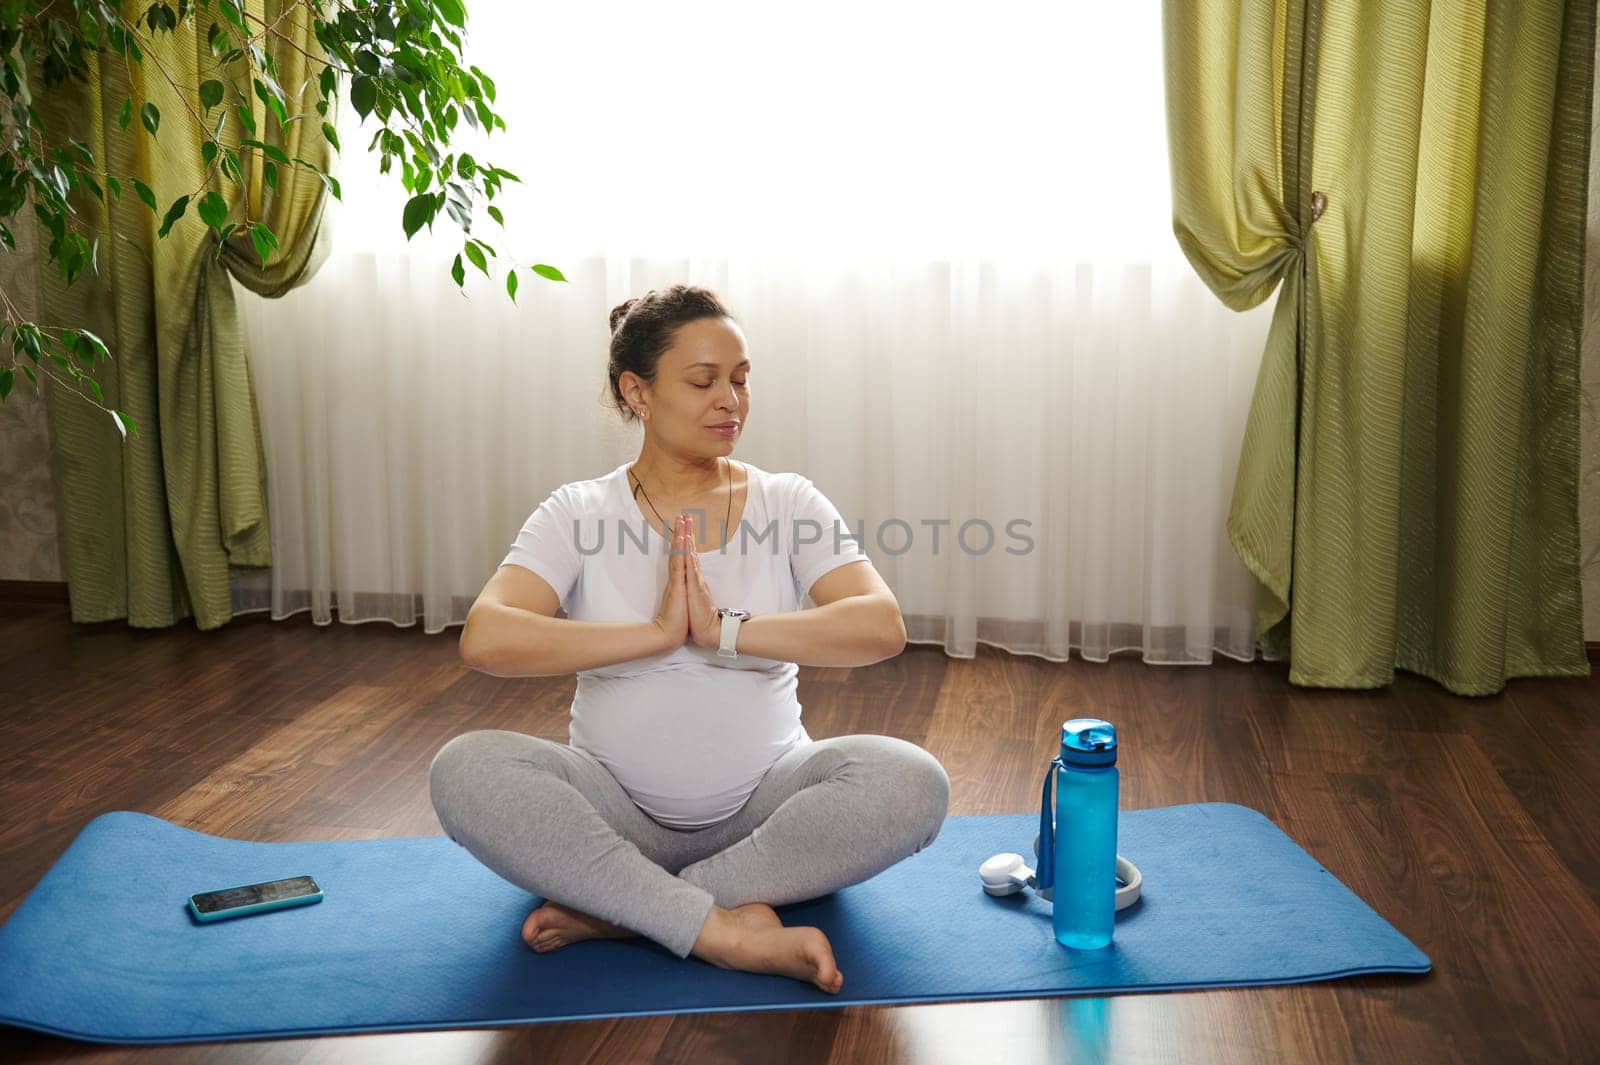 Delightful ethnic pregnant woman with closed eyes, meditating on lotus pose on a fitness mat, with hands palms together by artgf